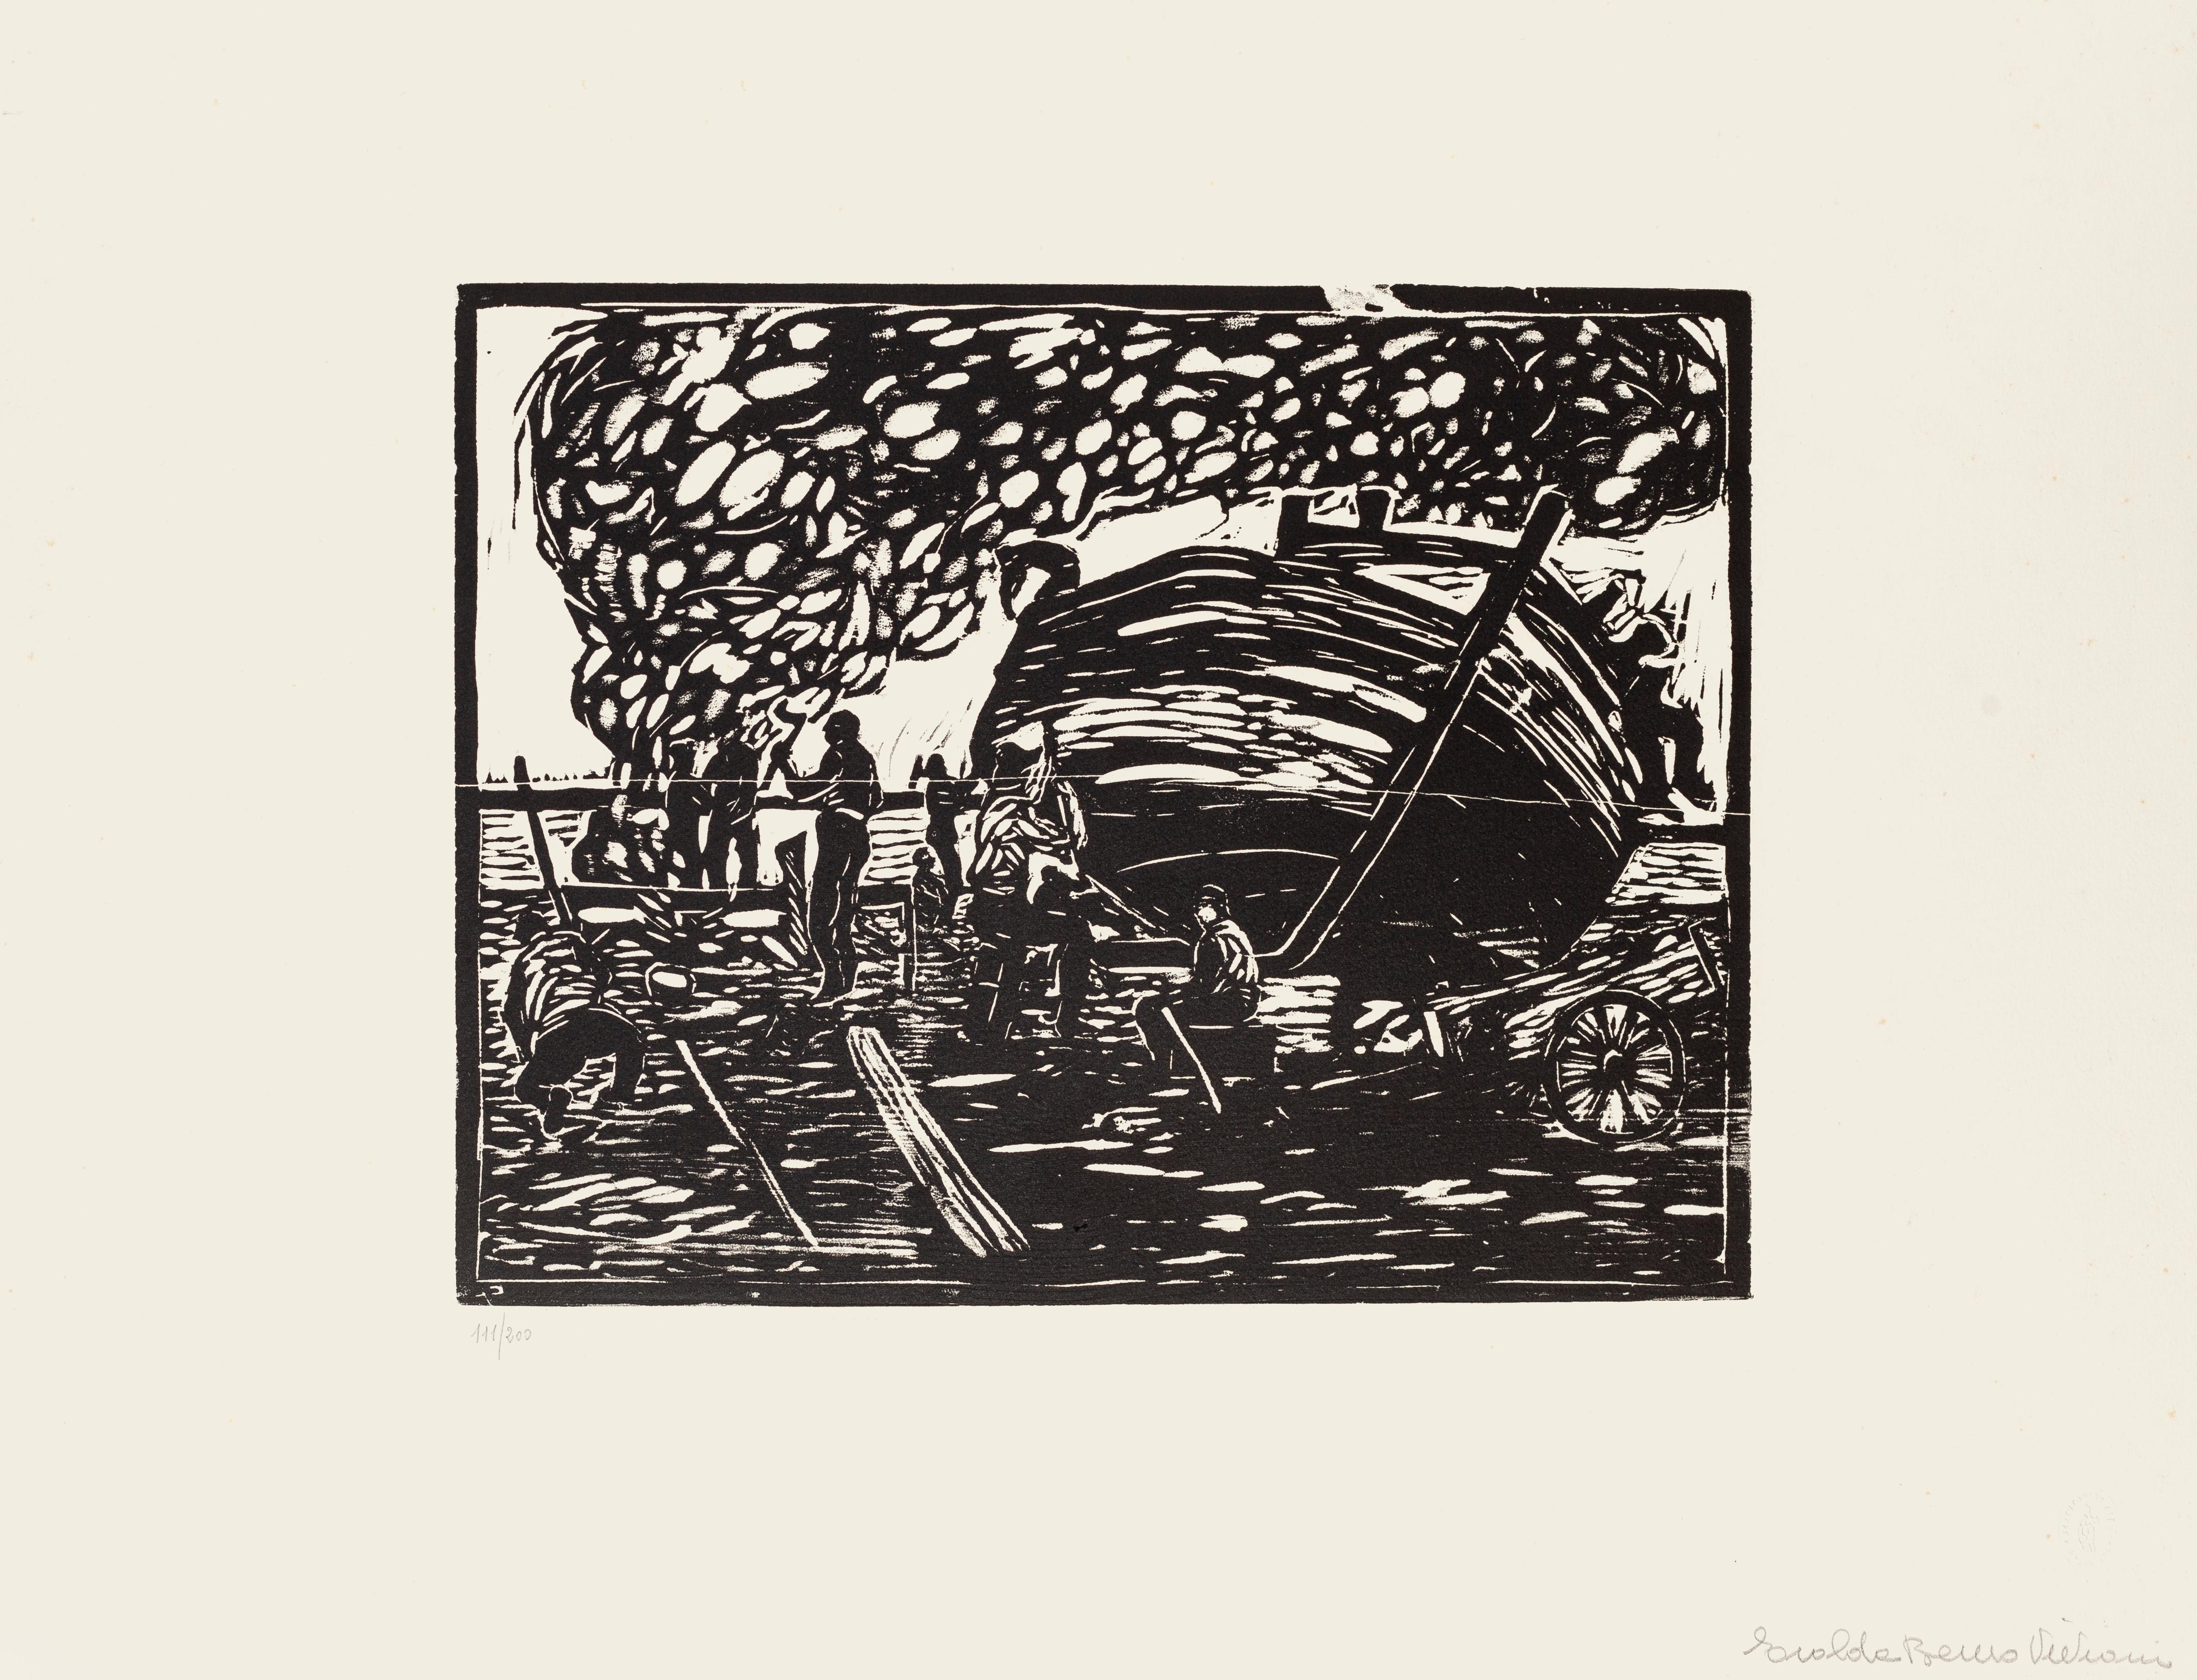 Workers on the Seaside - Woodcut by Giuseppe Viviani - 1926